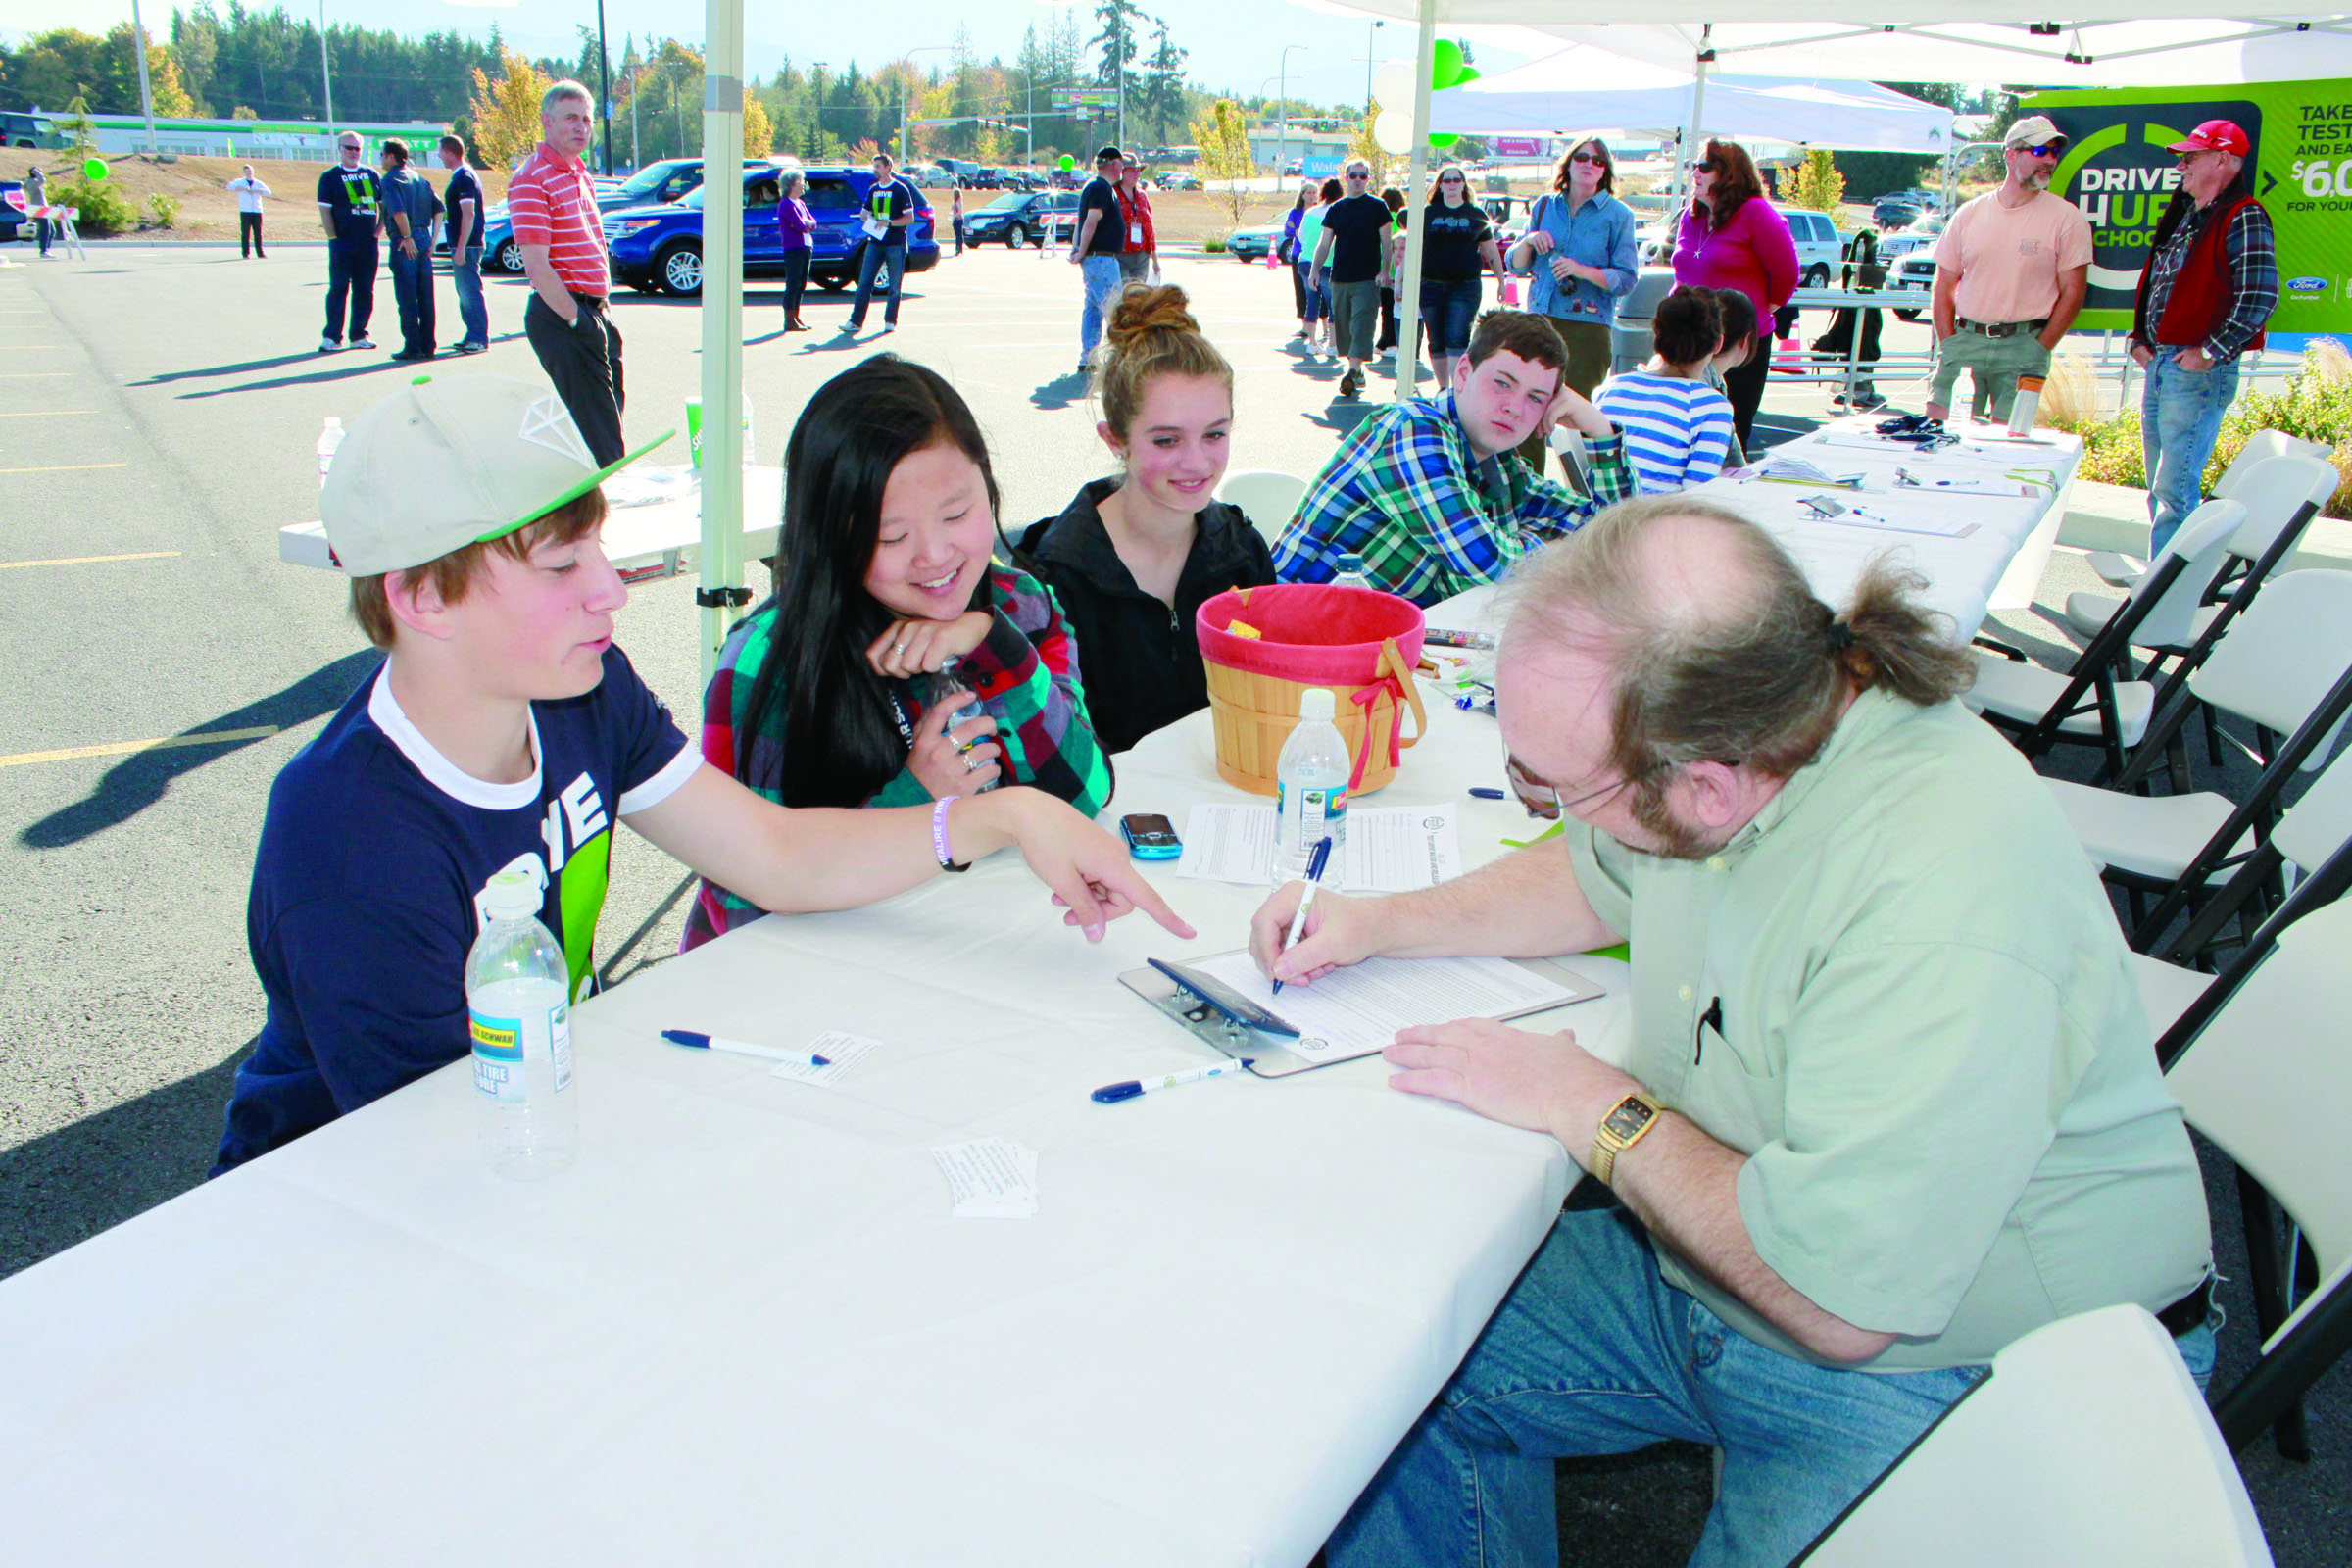 Student volunteers from the Port Angeles High School orchestra help out during the Drive One 4 UR School event. They are